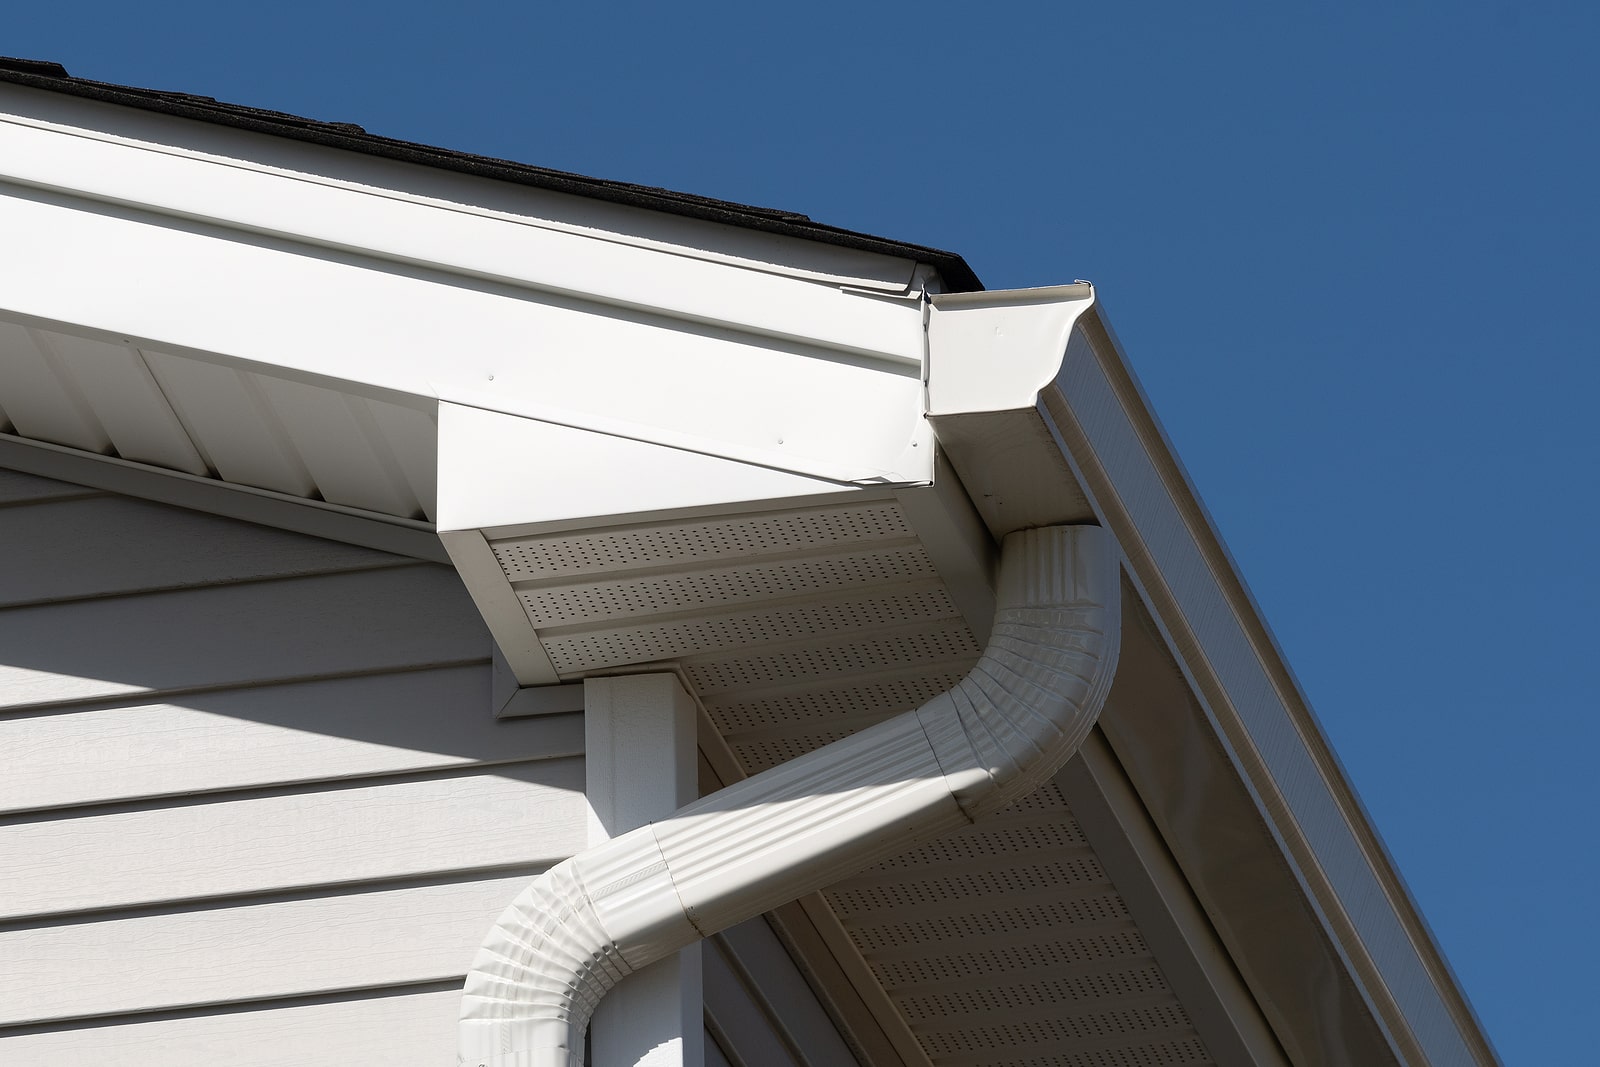 Siding and Gutter Replacement in Mansfield, GA